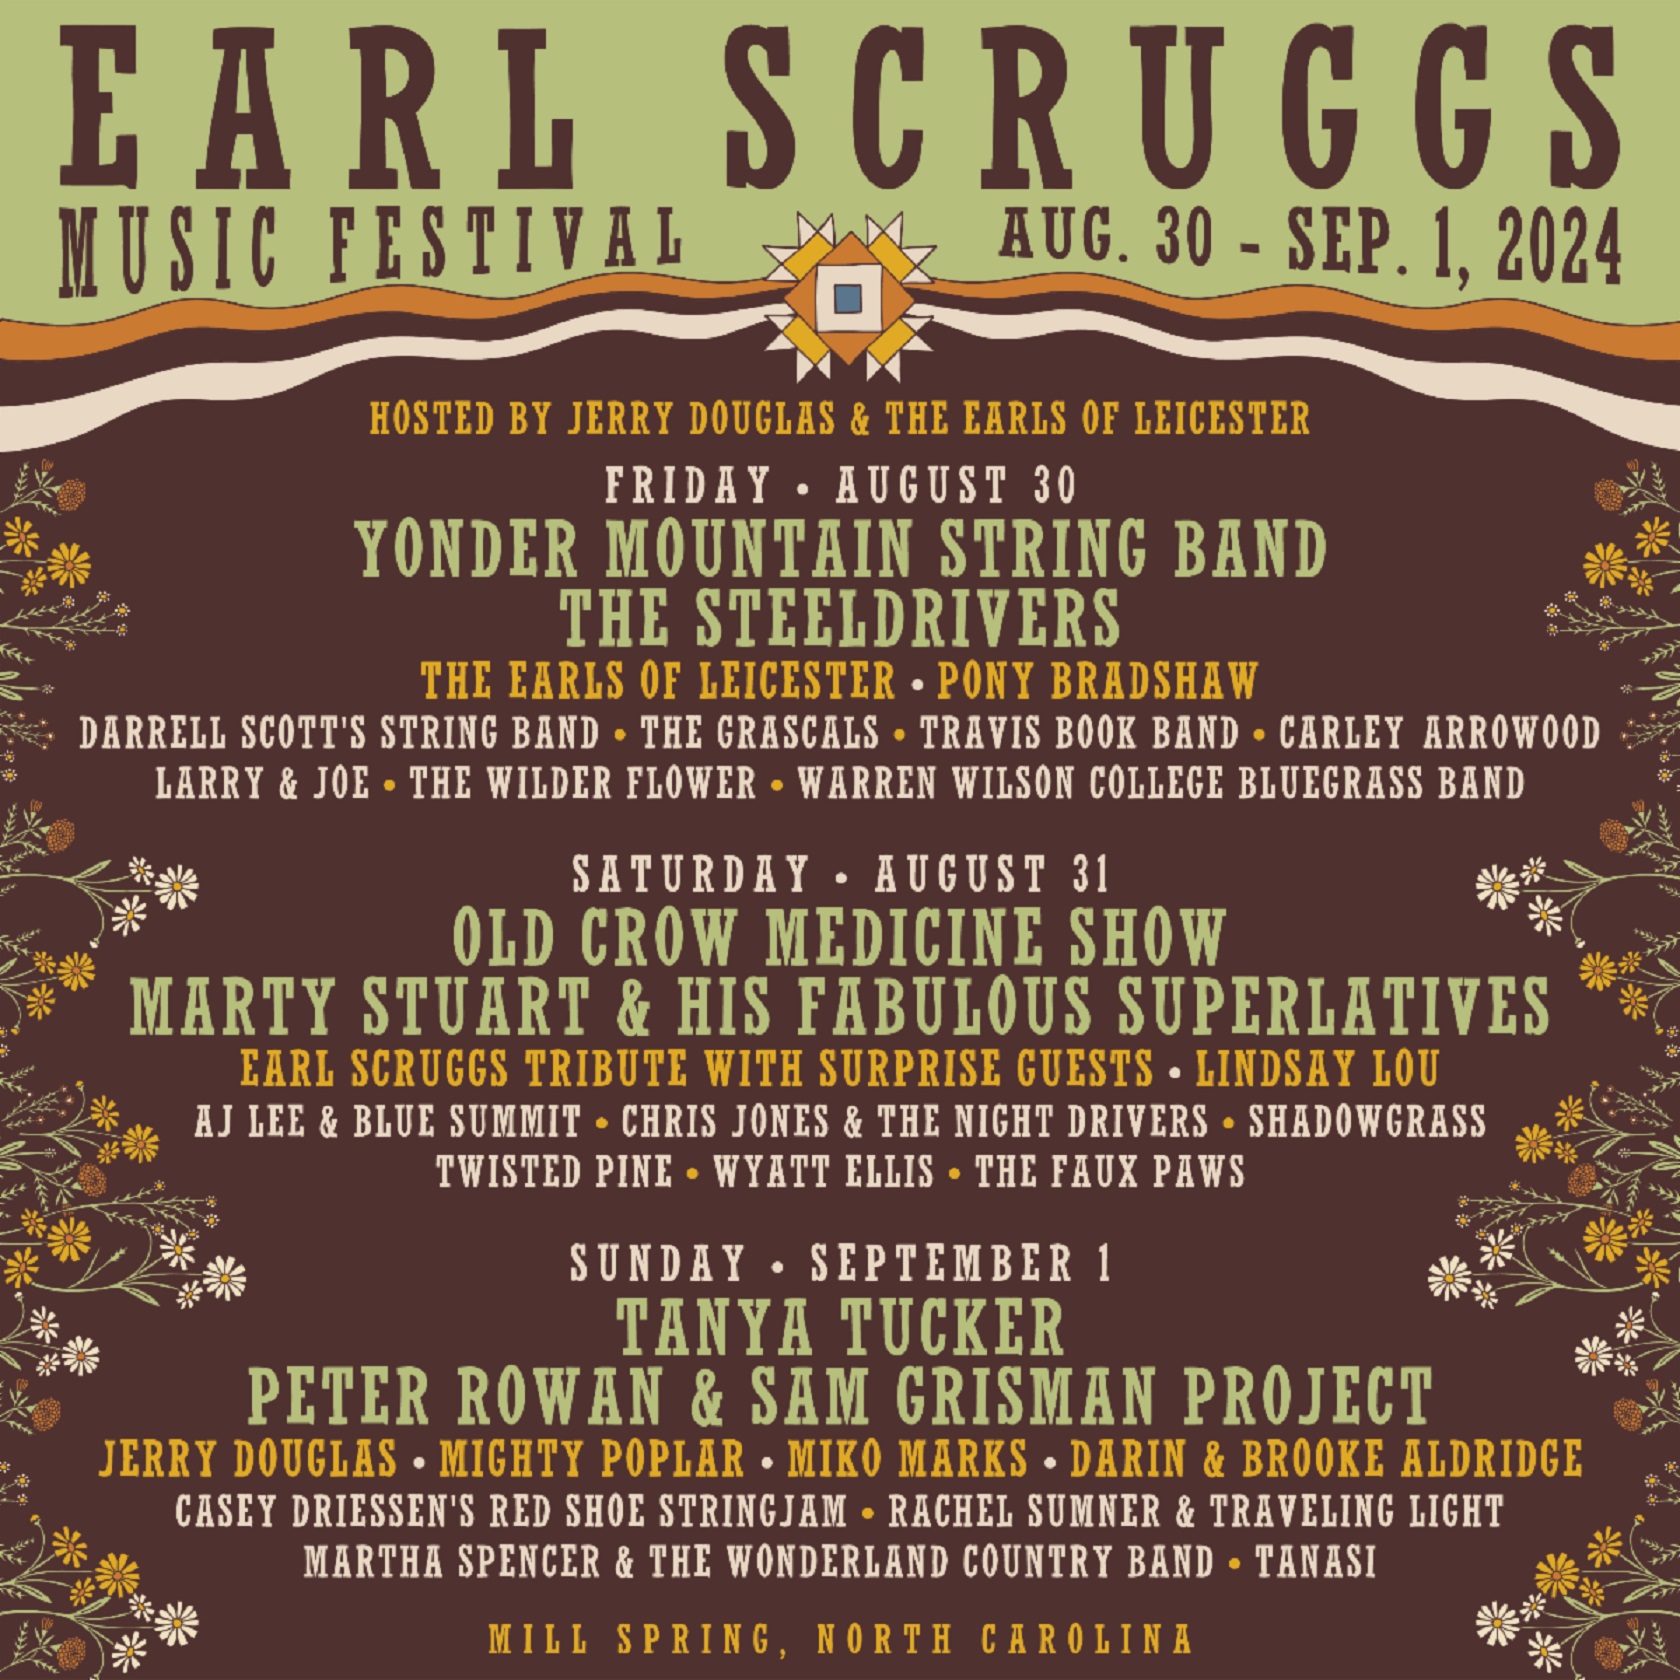 EARL SCRUGGS MUSIC FESTIVAL Announces Daily Lineups for 2024 Event